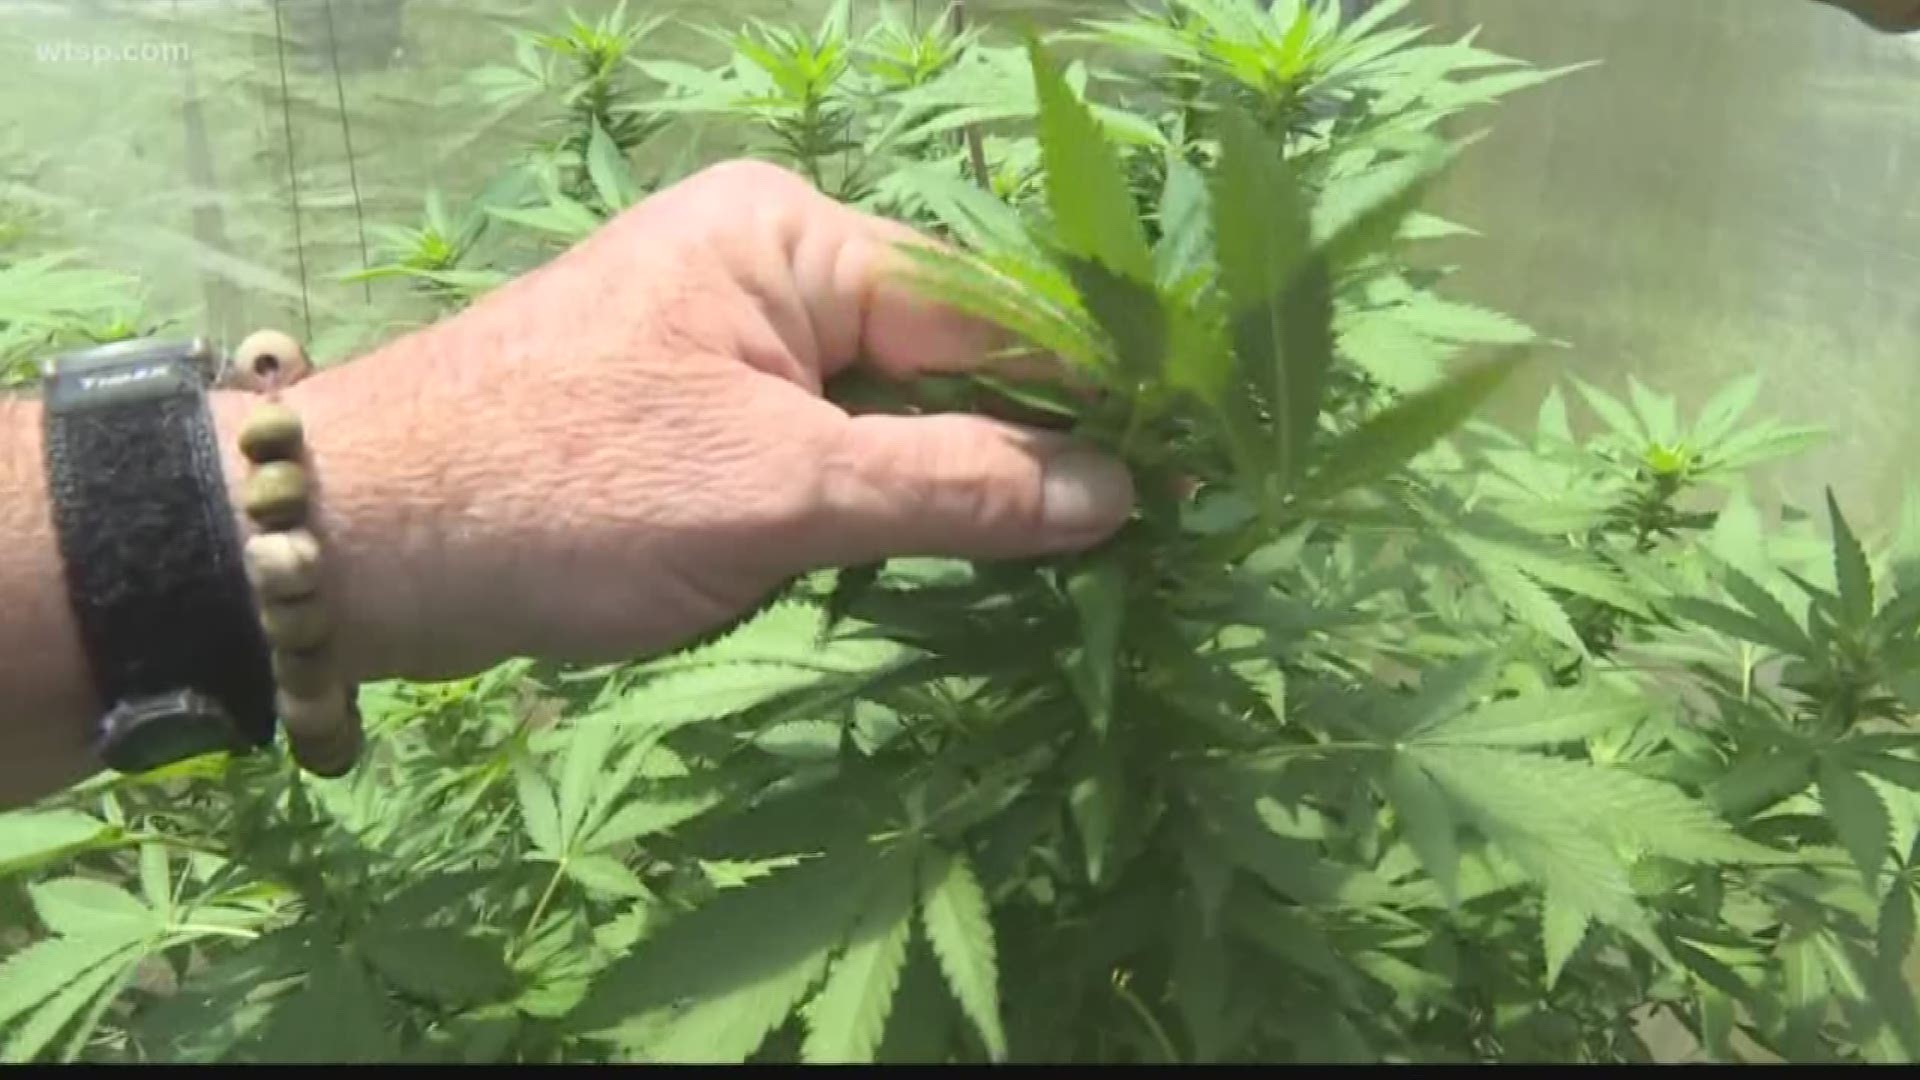 Multiple efforts are underway to make legalized recreational marijuana a key issue in Florida next year. 

There are a handful of organizations working to get the issue on the November 2020 ballot so Florida voters can have a say in the matter. 

Meanwhile, state lawmakers are considering their options to try and address the issue in the state legislature. https://on.wtsp.com/2P5jiqH